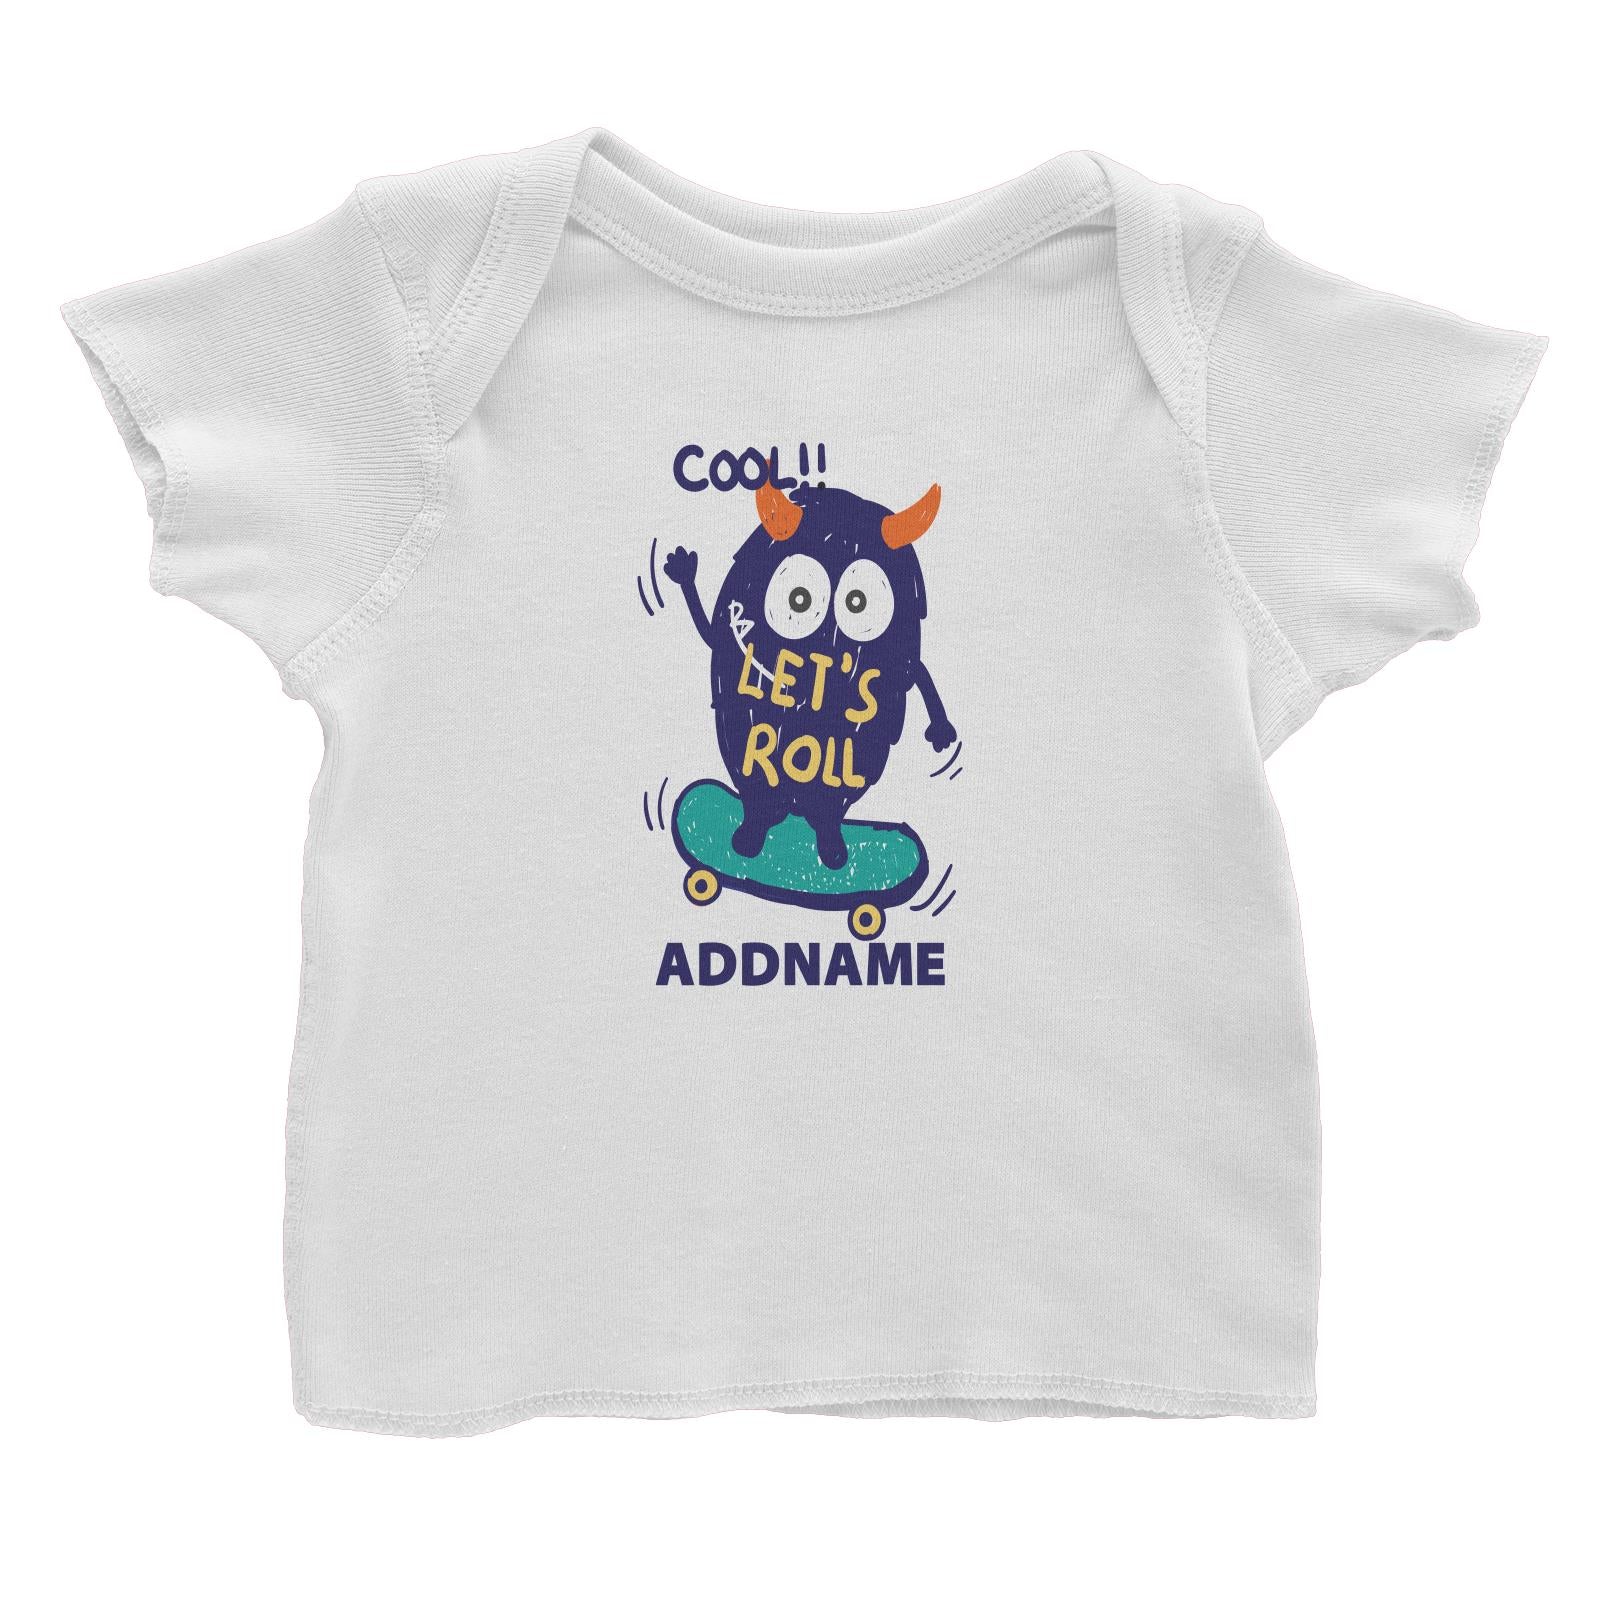 Cool Cute Monster Cool Let's Roll Monster Addname Baby T-Shirt